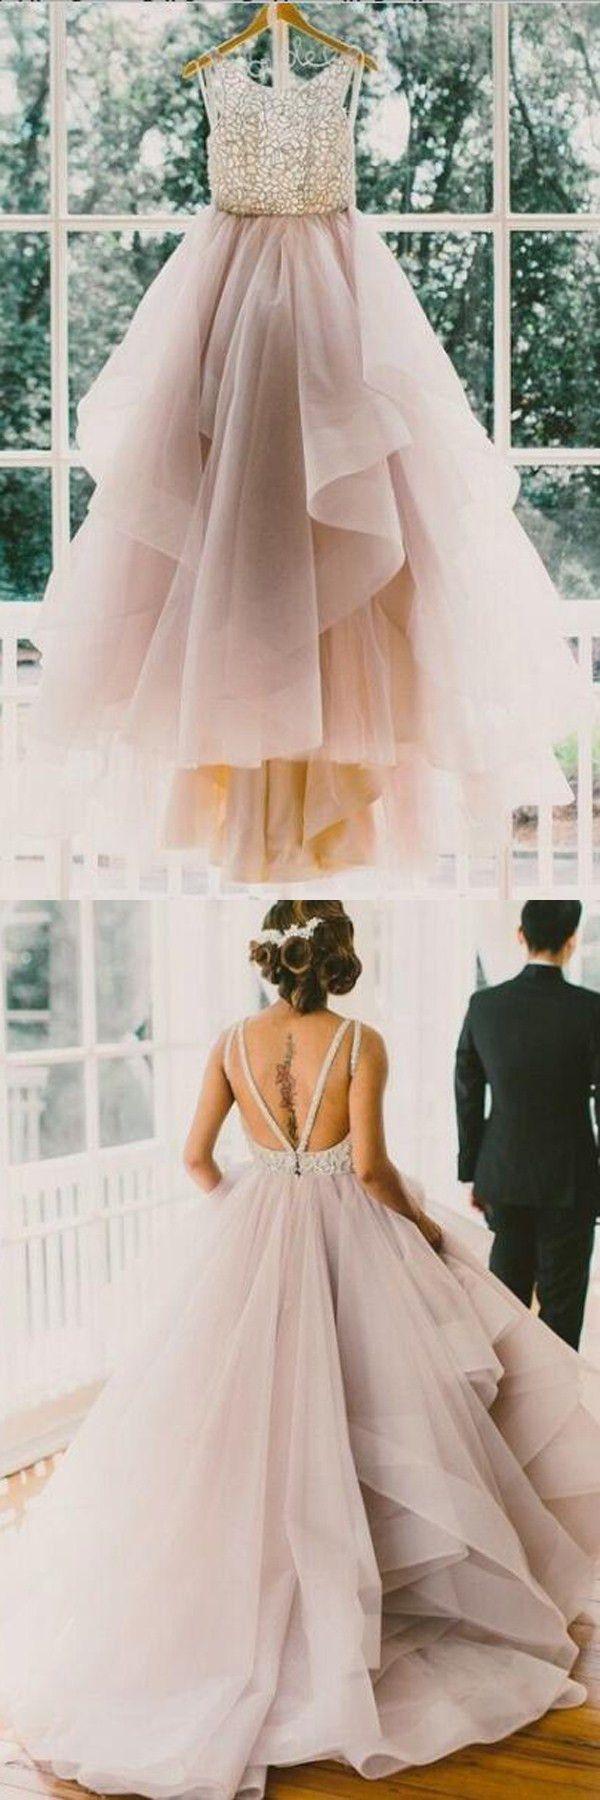 Mariage - The Perfect Fairytale Dress